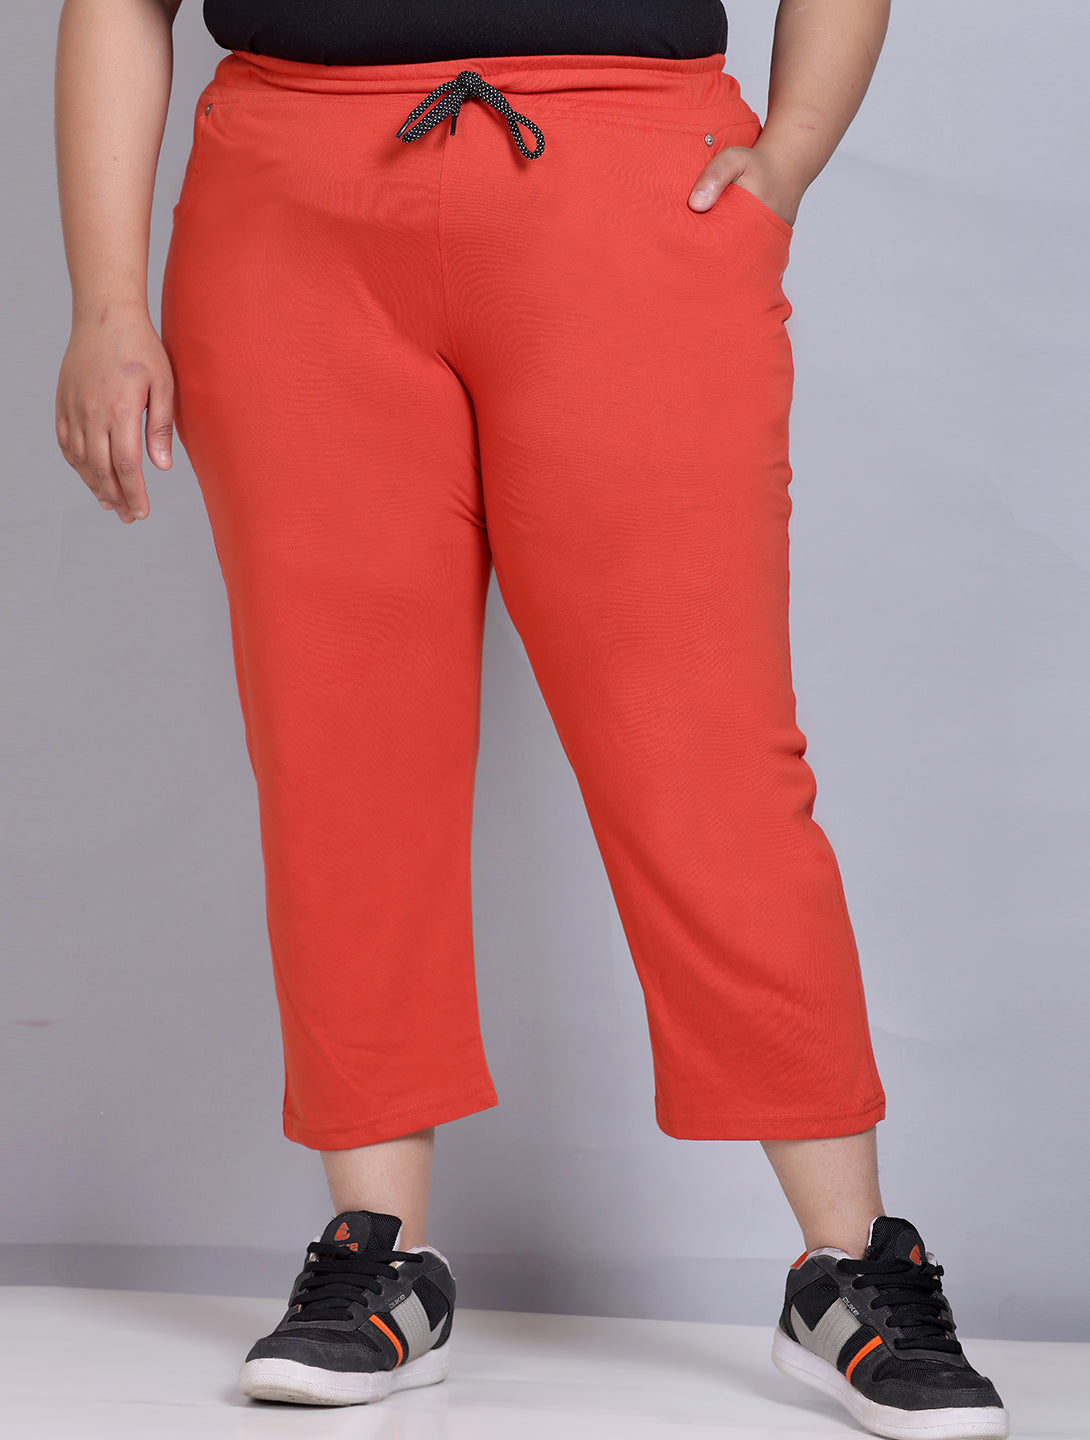 Ladies Half Pant - Get Best Price from Manufacturers & Suppliers in India